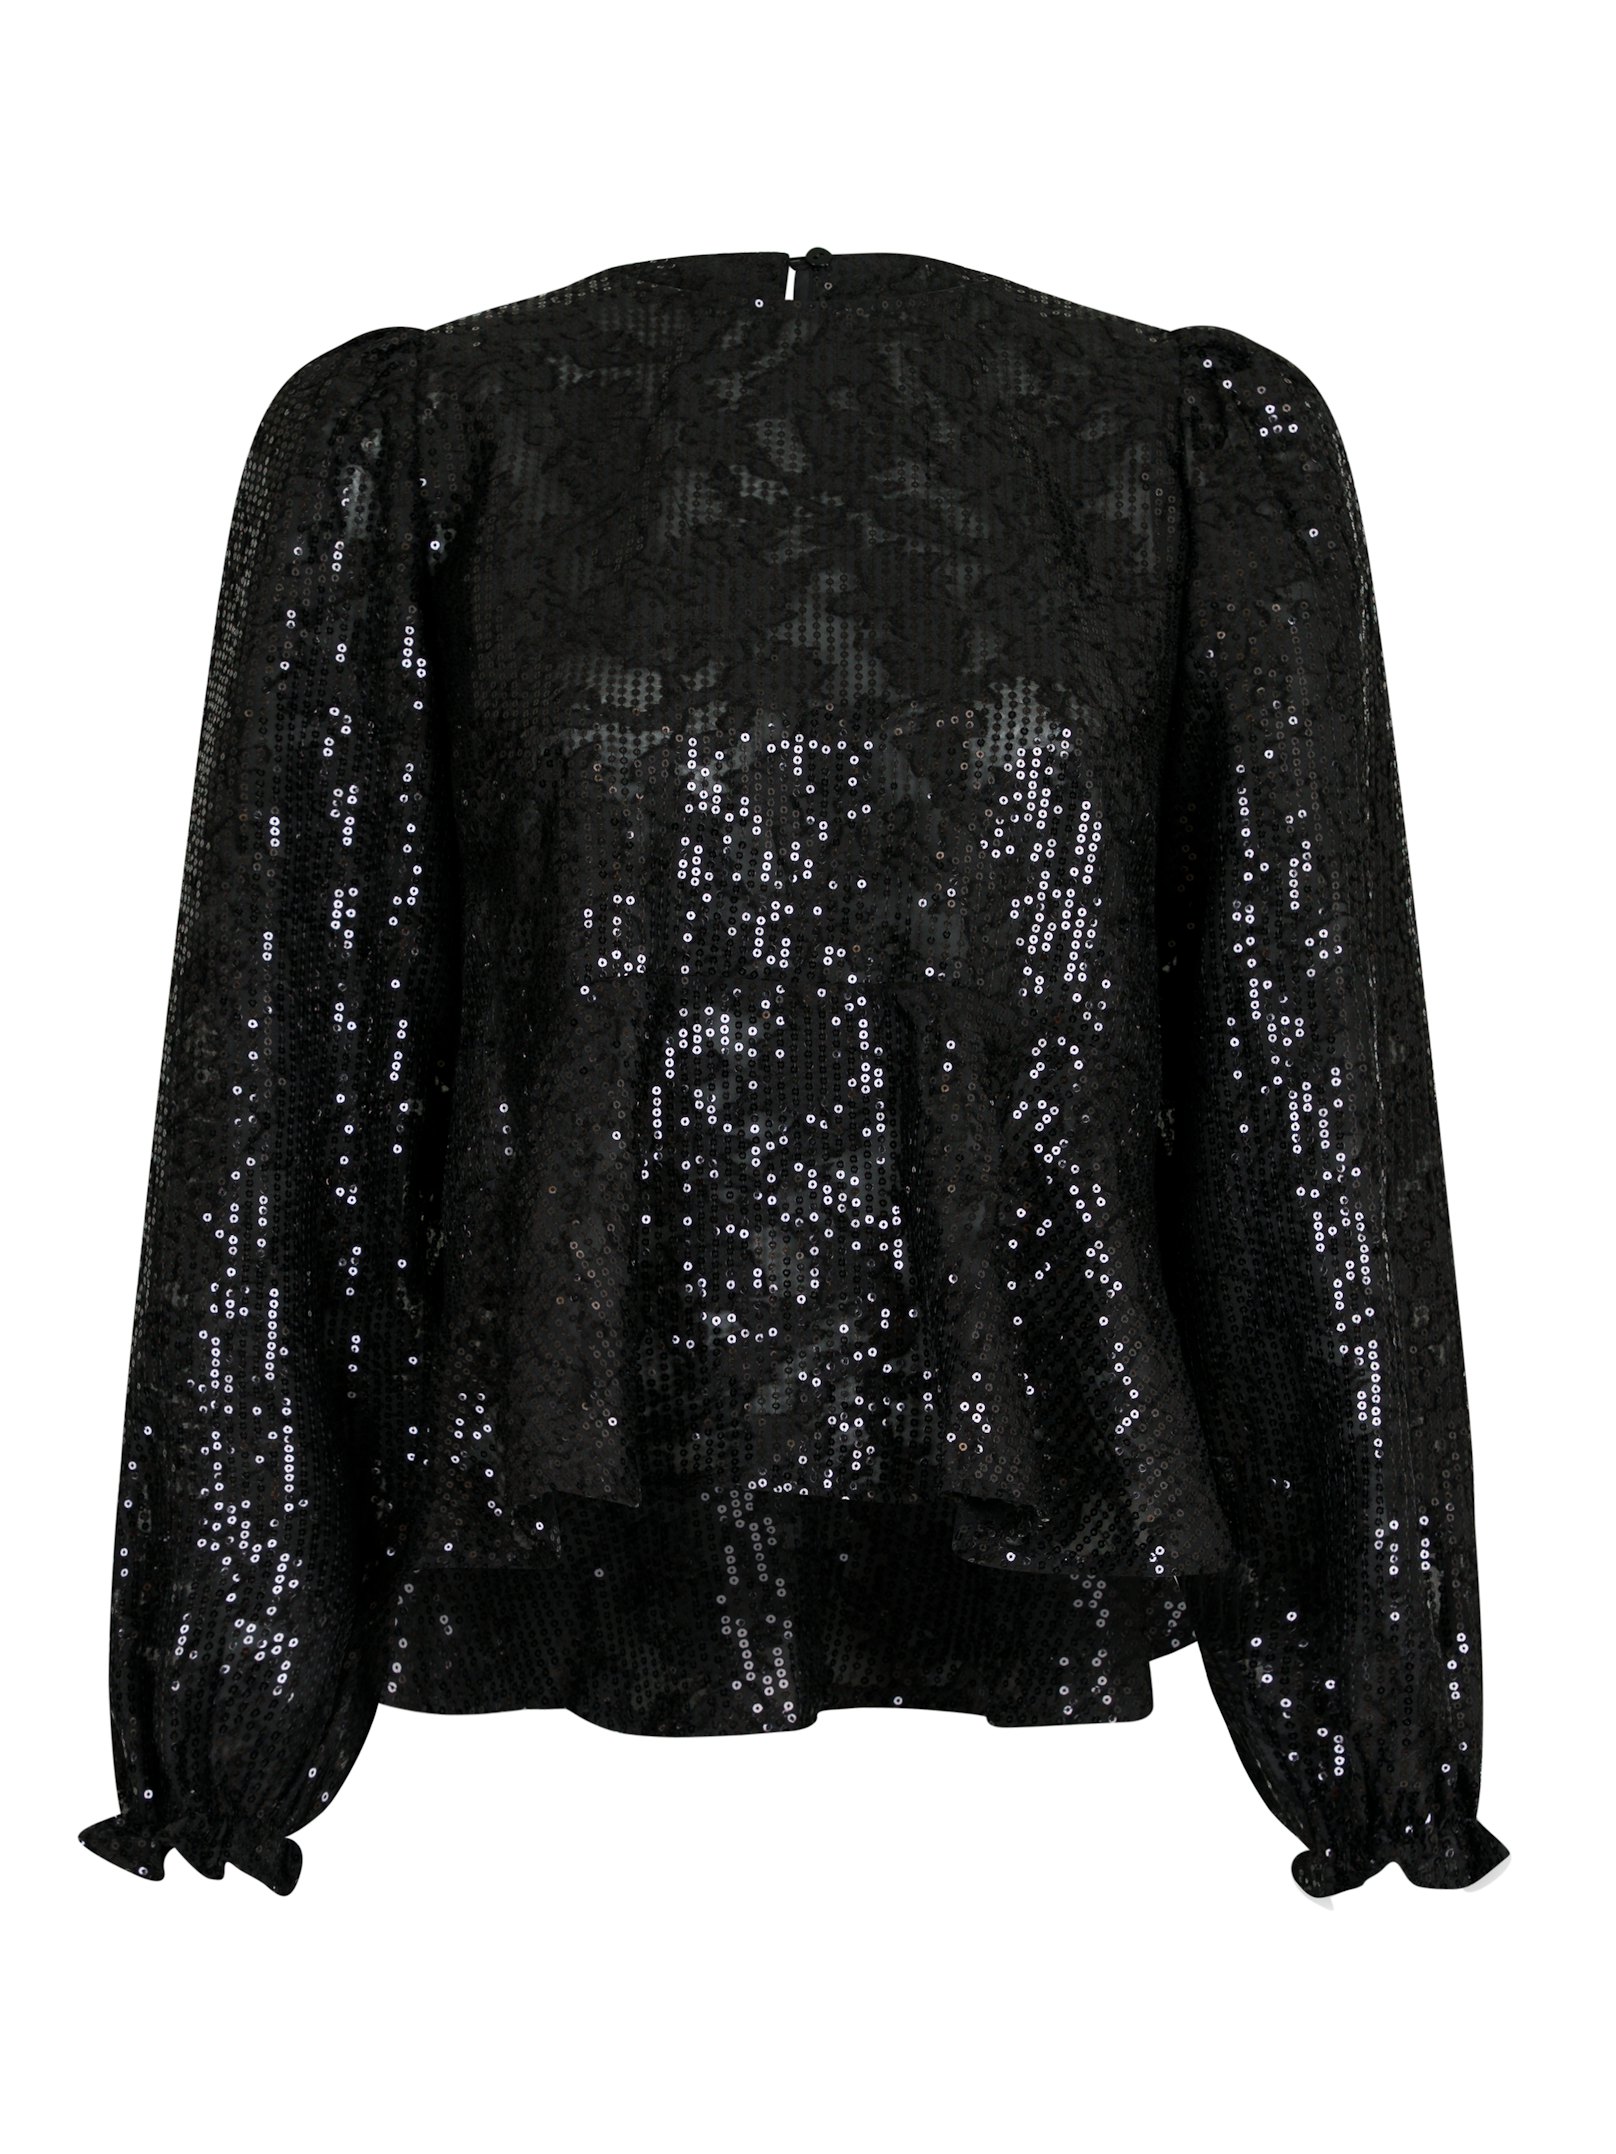 Rizzo Sequins Blouse